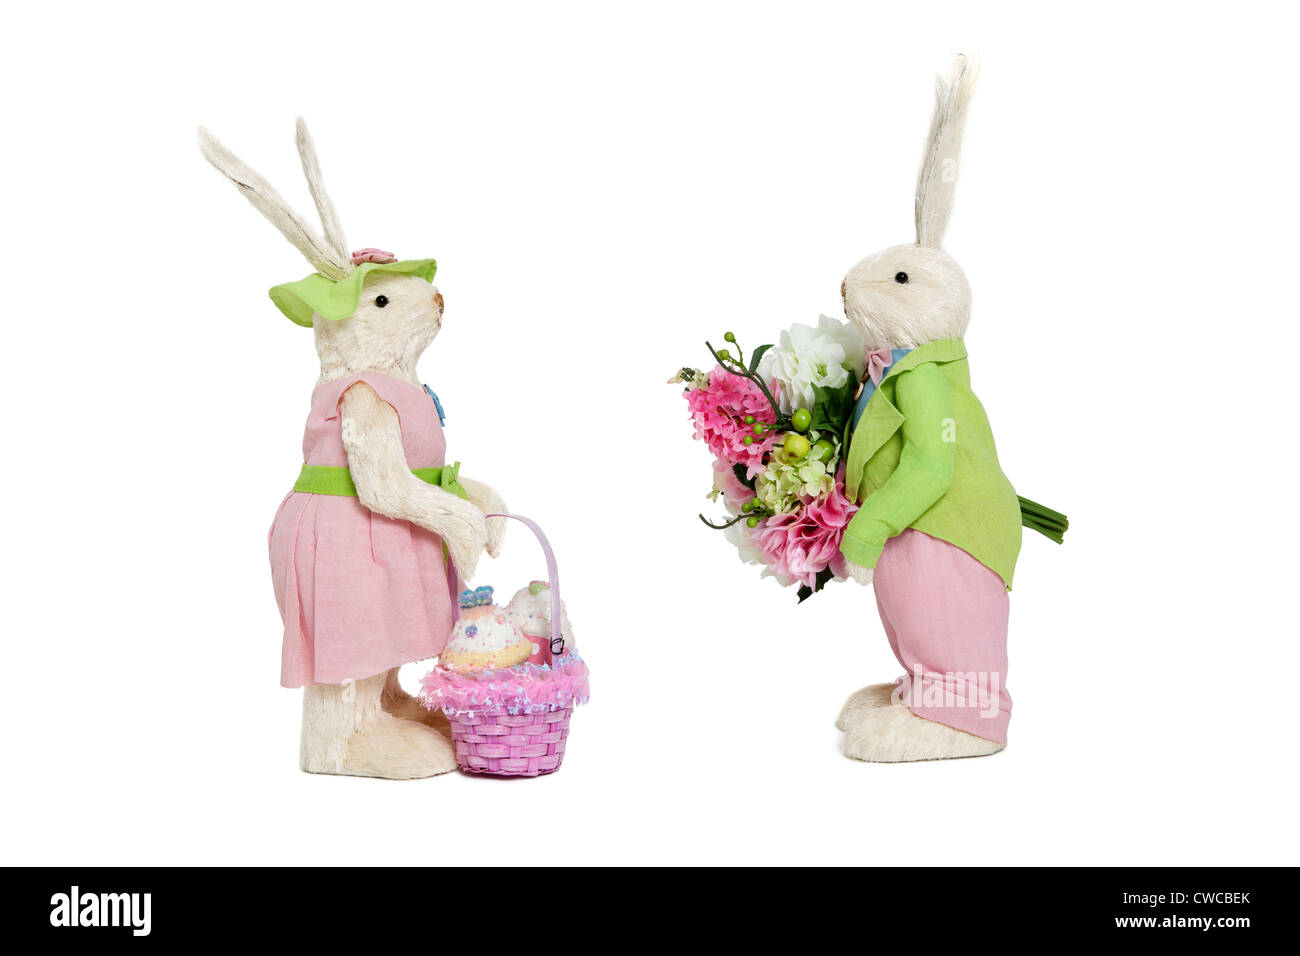 Stuffed toys portrayed as male with flowers and female with basket over white background Stock Photo